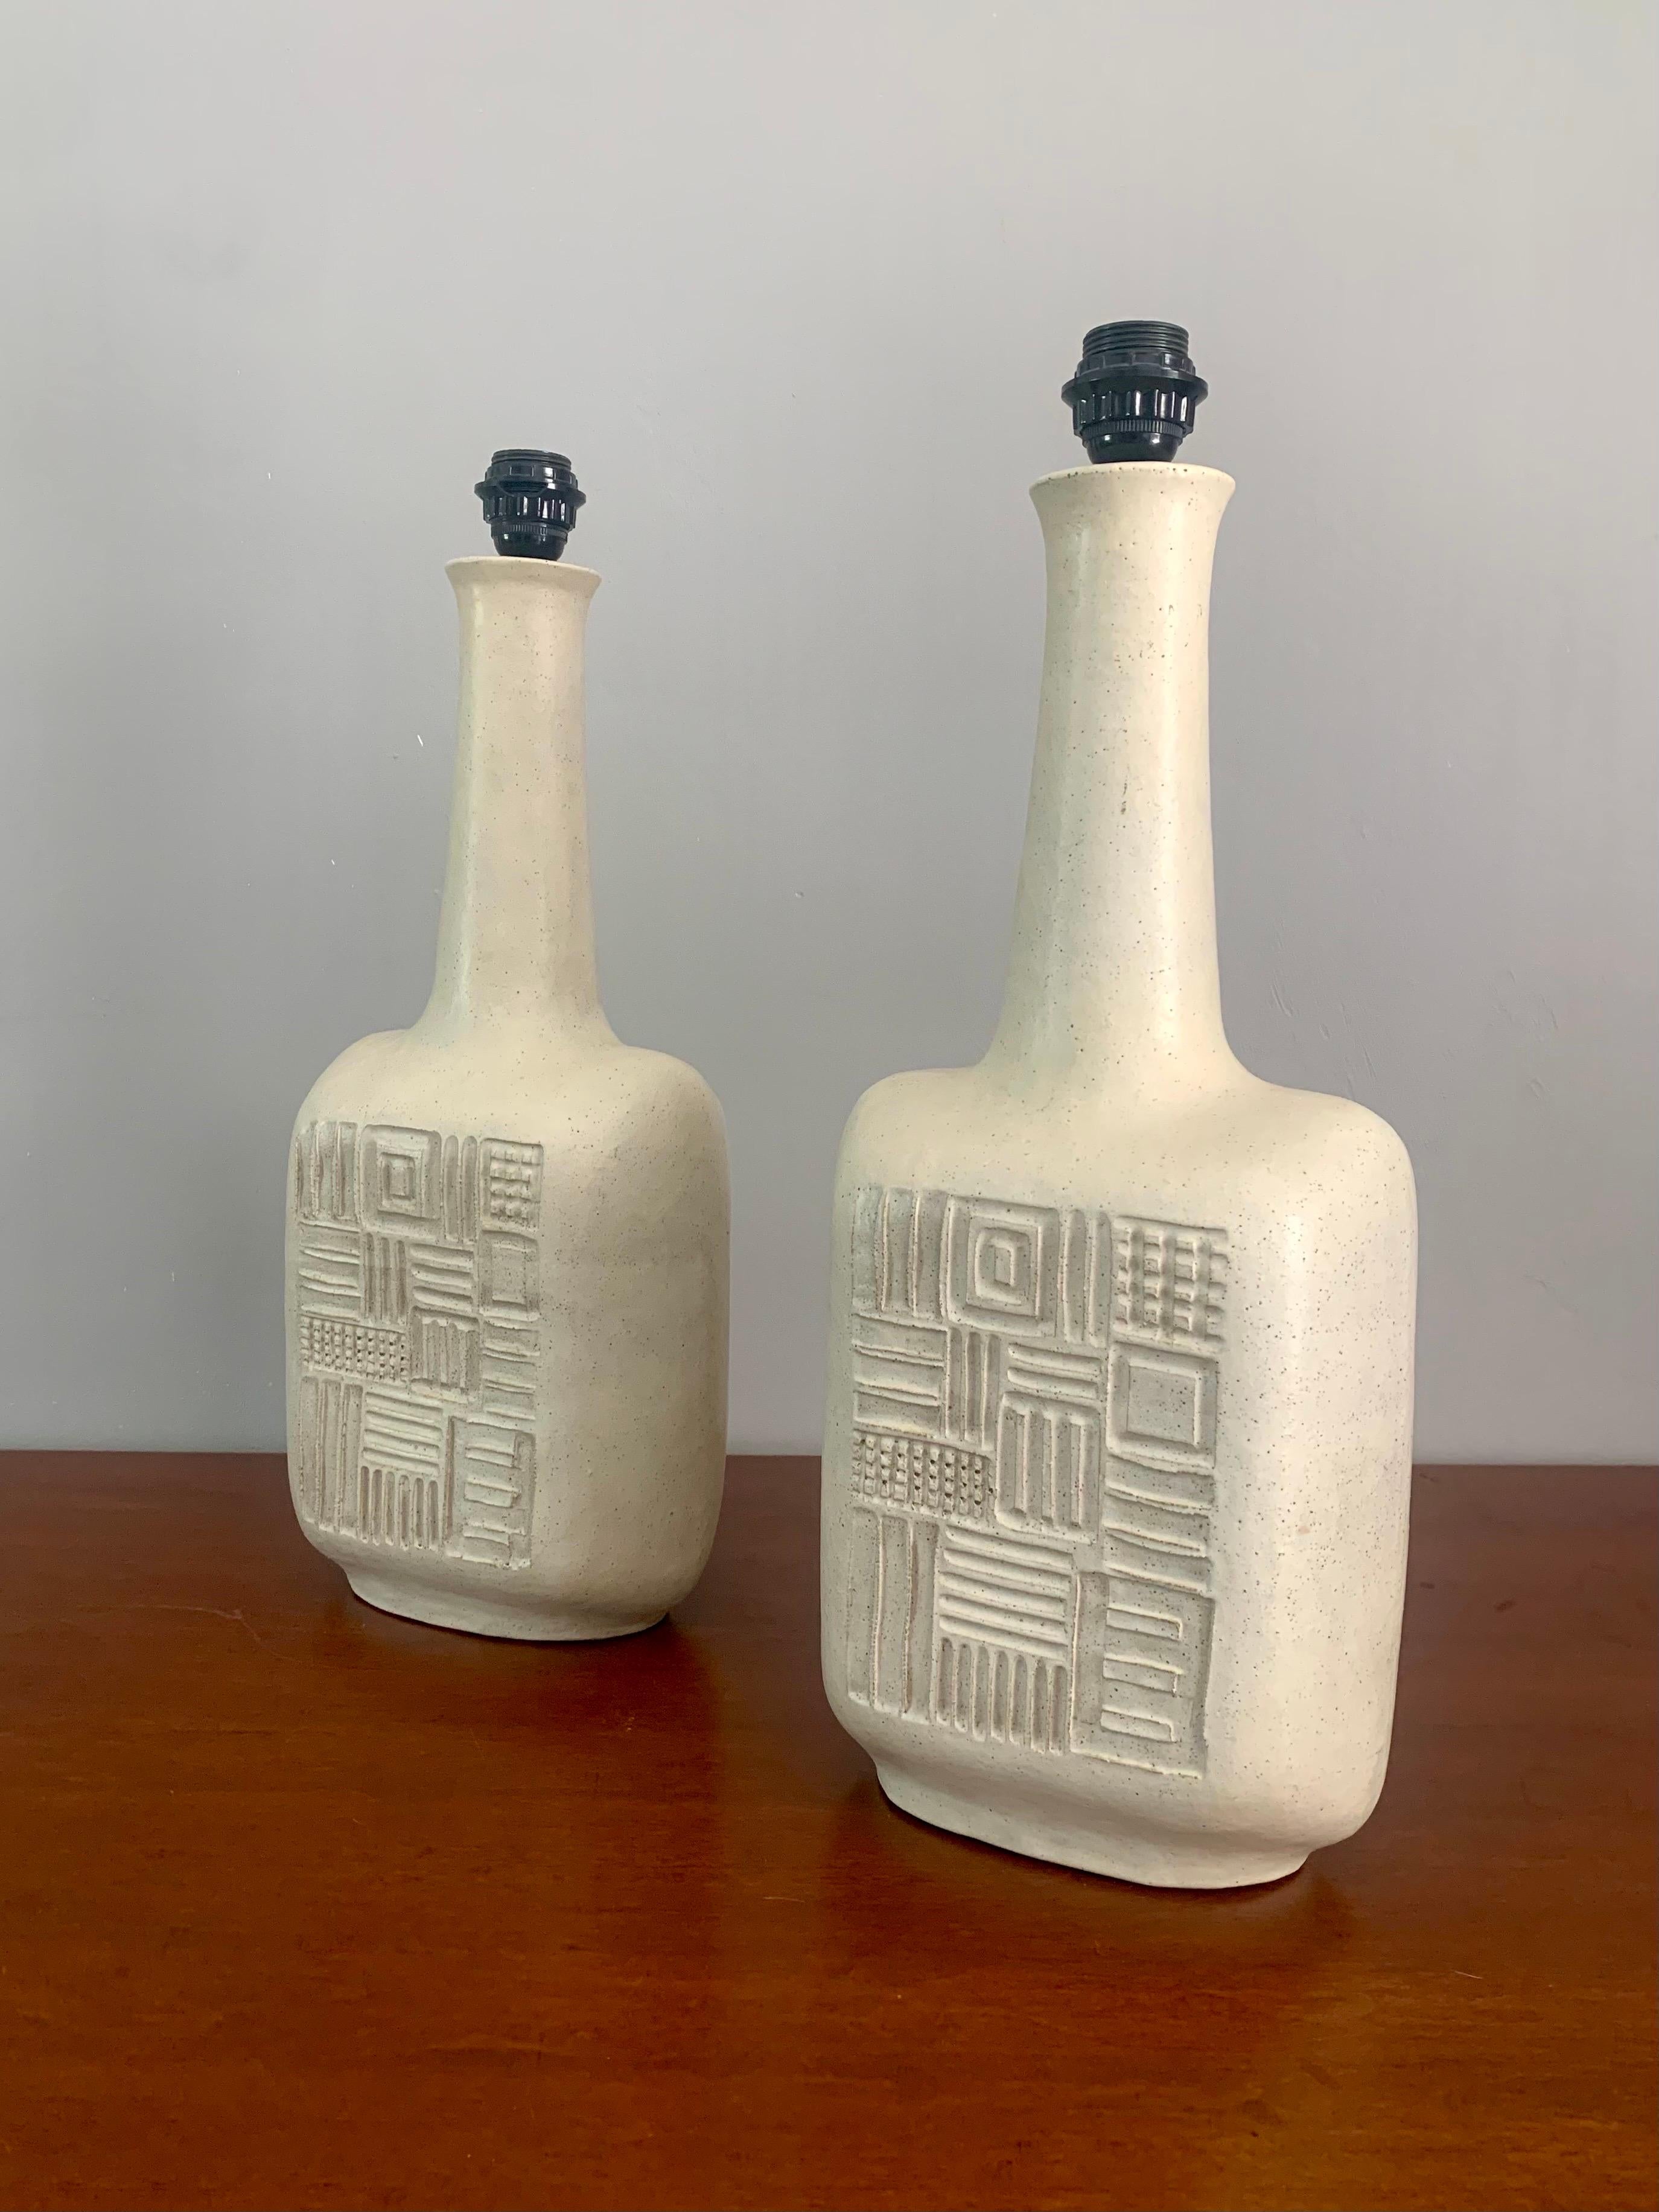 Rare pair of hand thrown ceramic Gambone lamps. I believe their made by Bruno but potentially Guido instead. Each lamp is signed on the bottom “Gambone / Italy”. 

Sculptural lamps are in the form of classic mid century modern vases with a